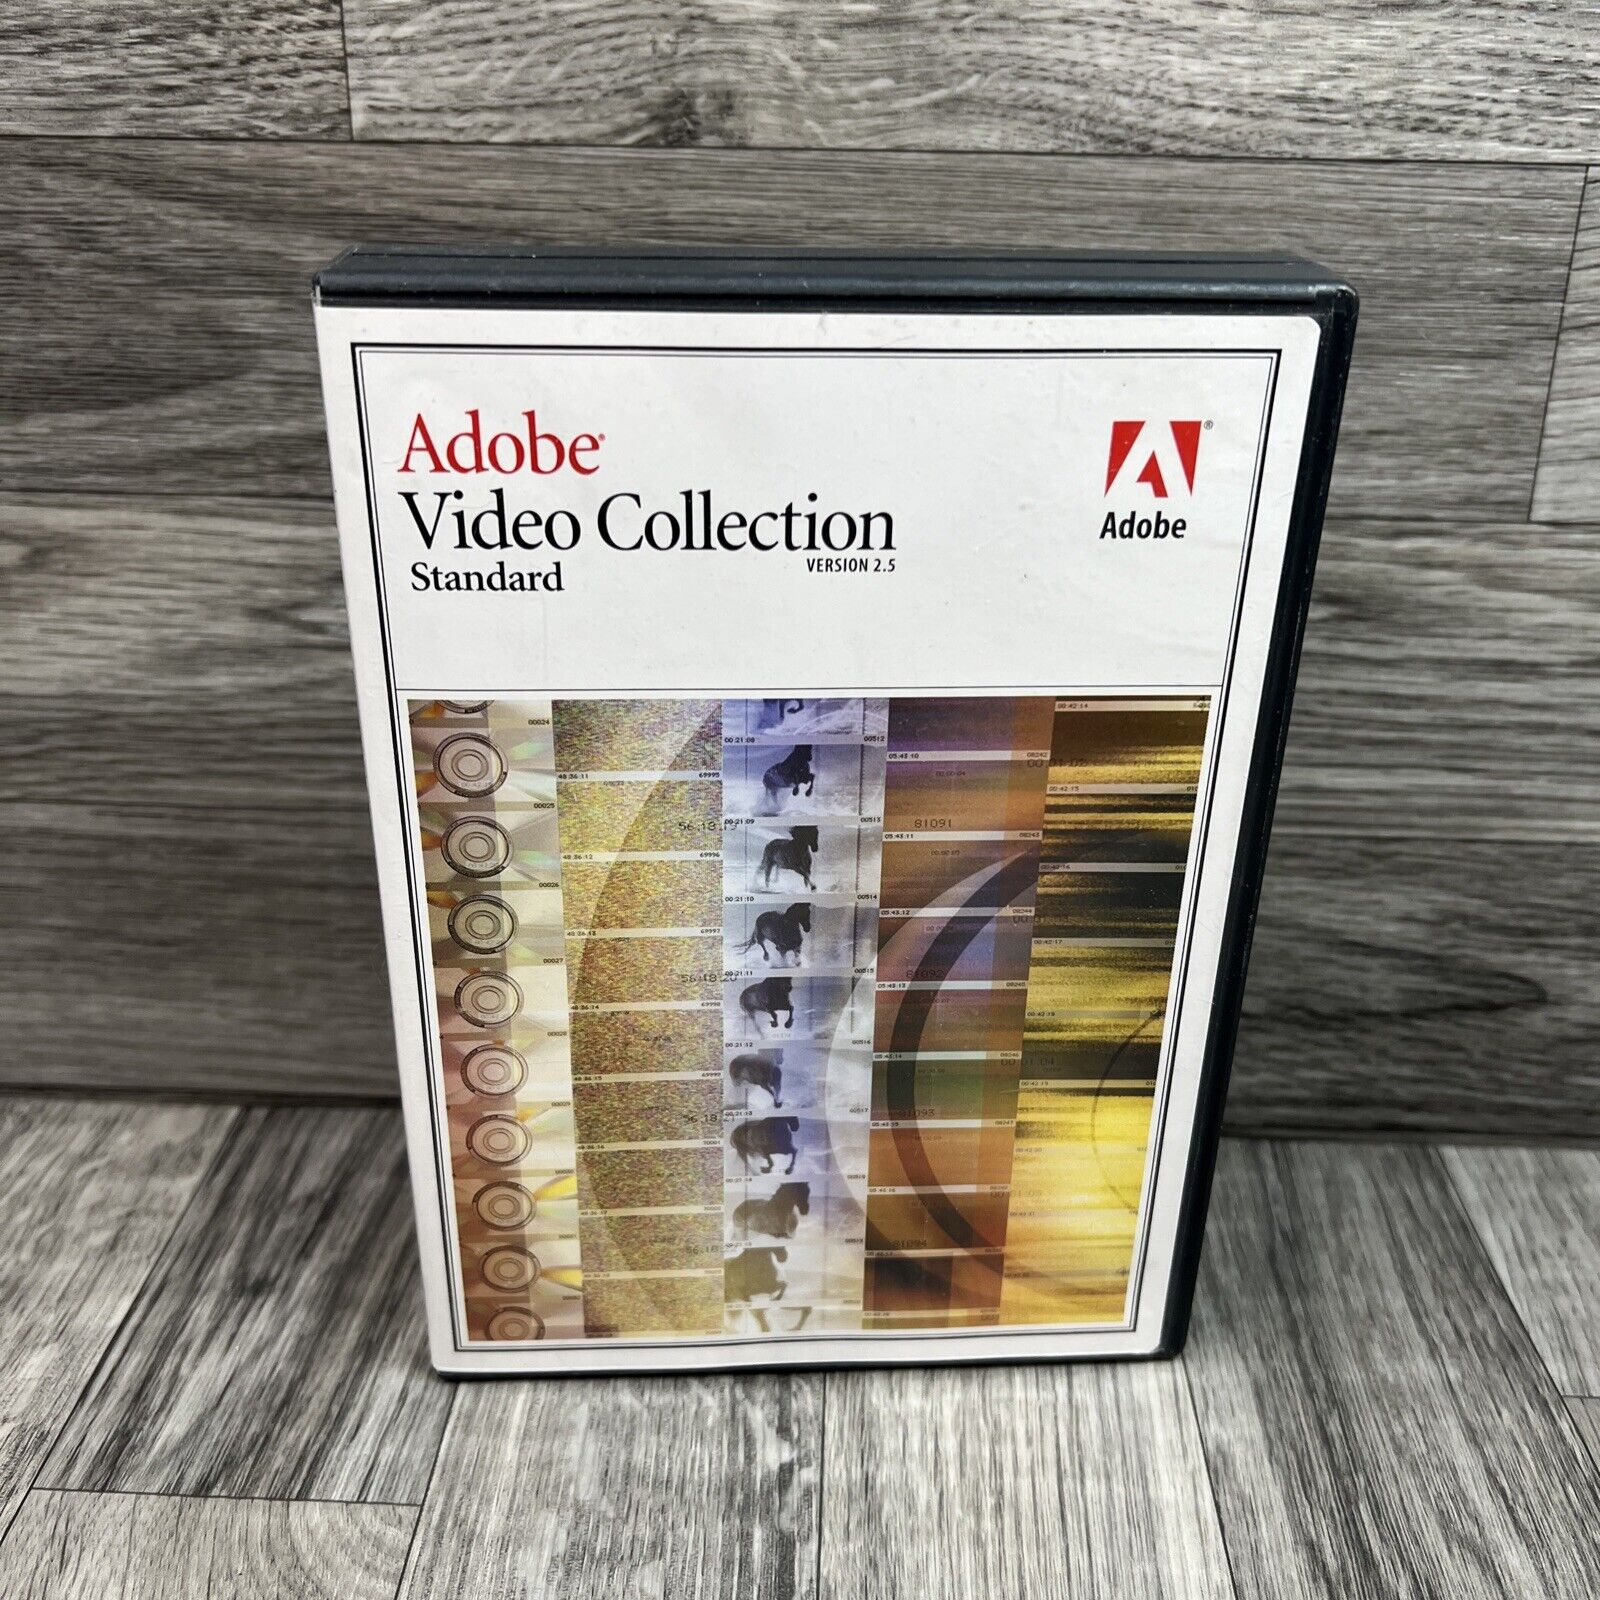 Adobe Video Collection Standard Version 2.5 - CD's & serial numbers + EXTRAS